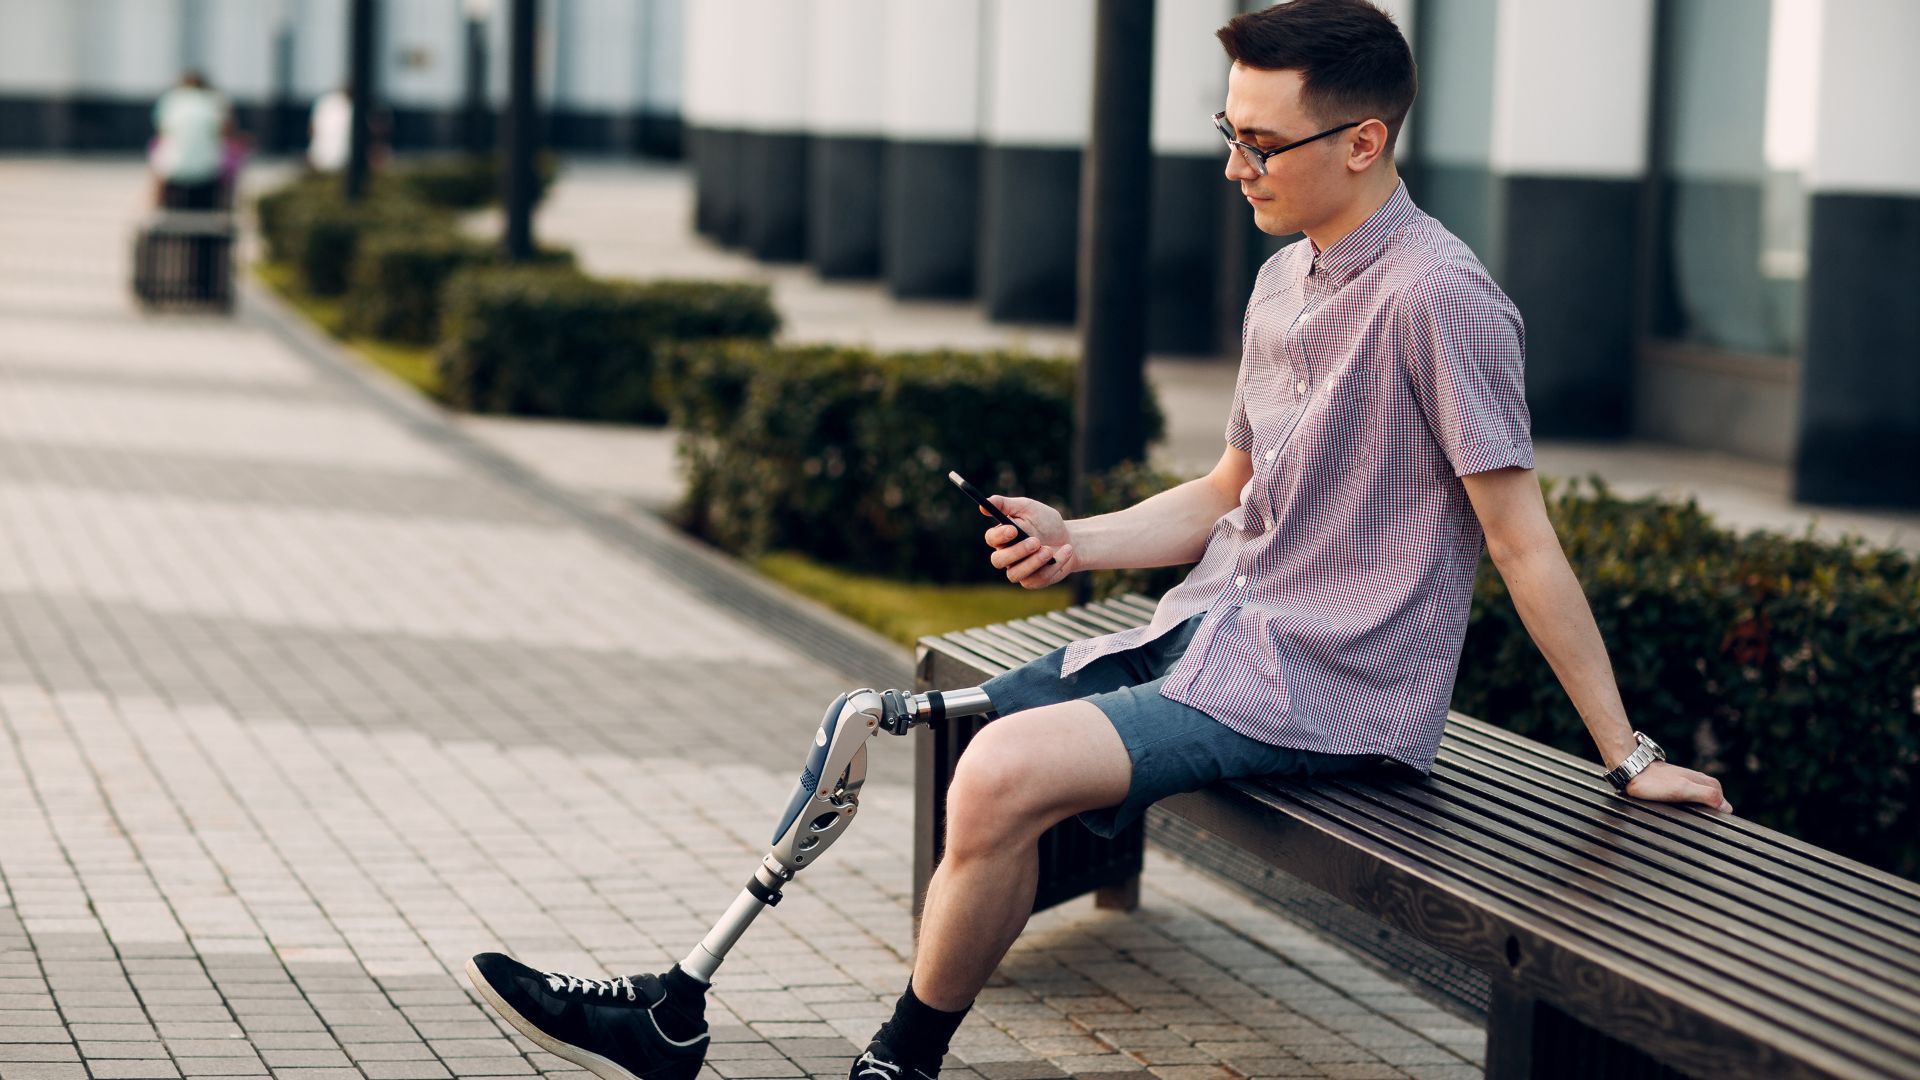 Man with prosthetic leg sitting on a bench texting. Propel Physiotherapy leg amputation rehabilitation and prosthetic fitting.